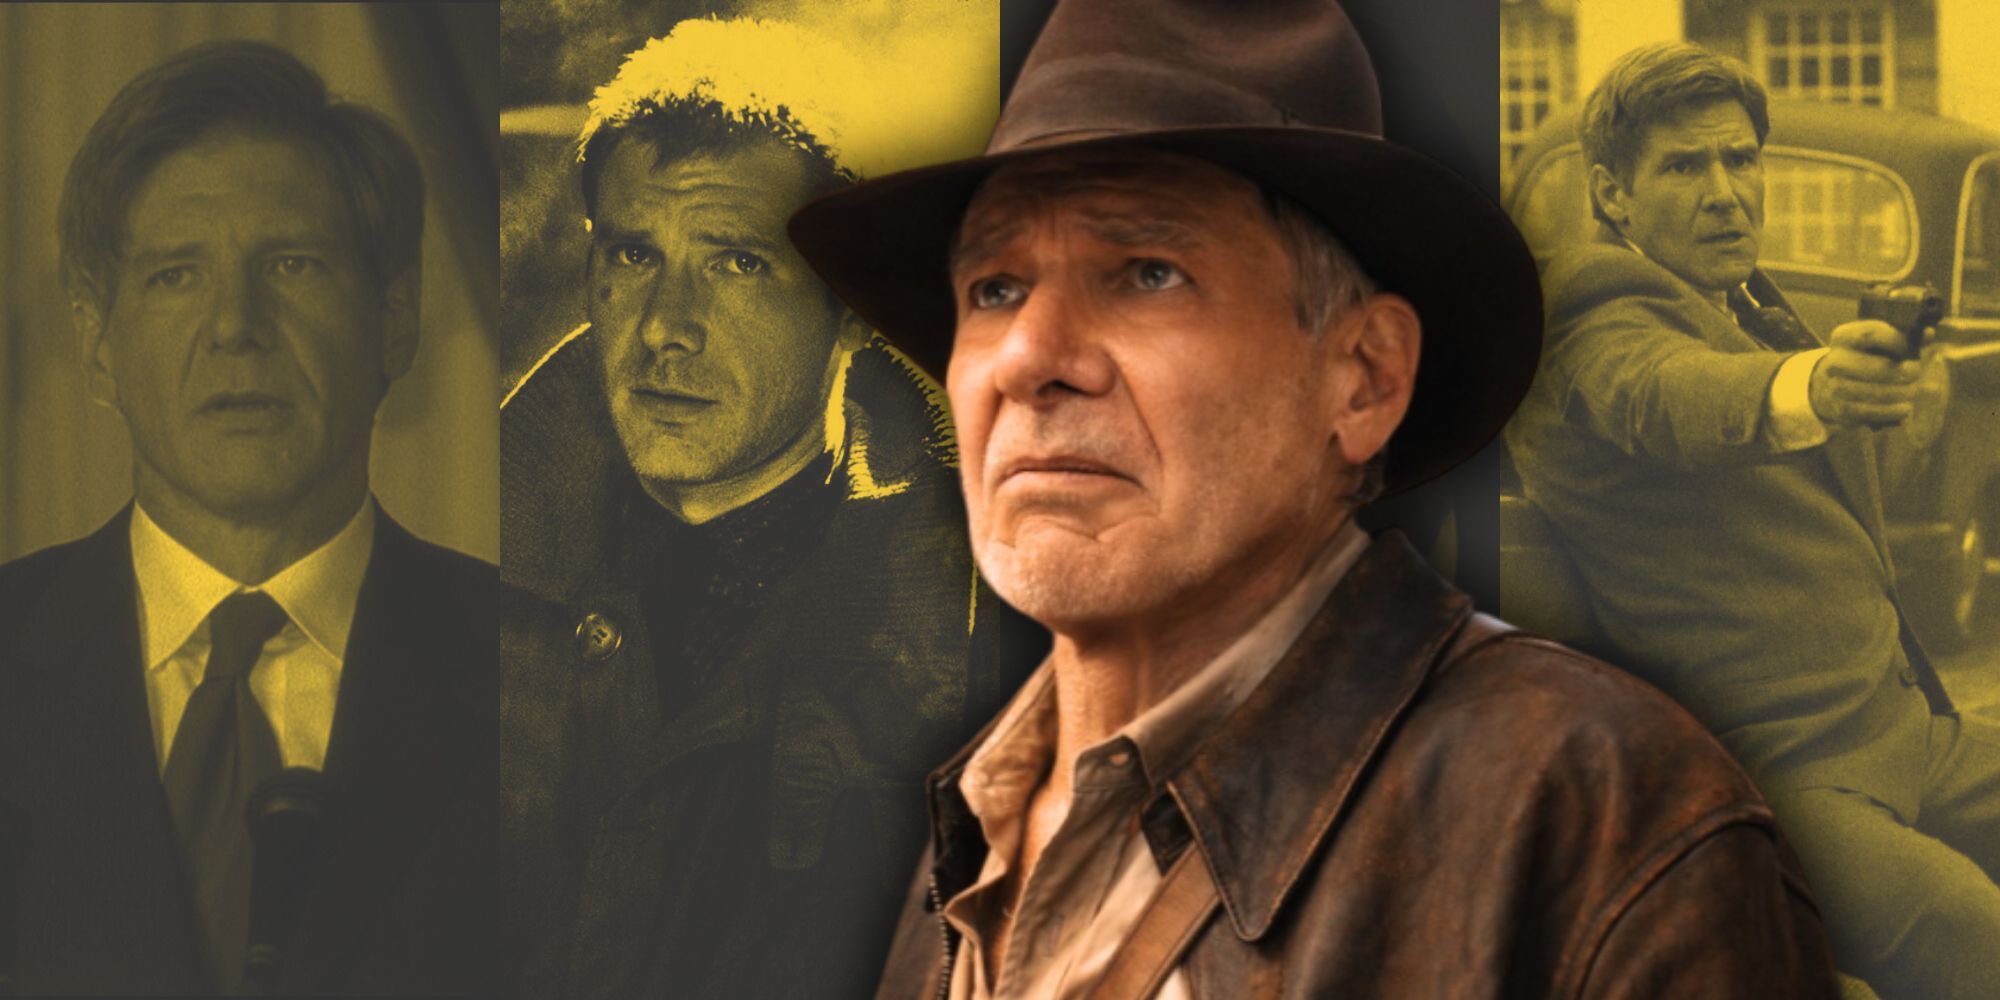 Harrison Ford to reprise 'Indiana Jones' role for final movie